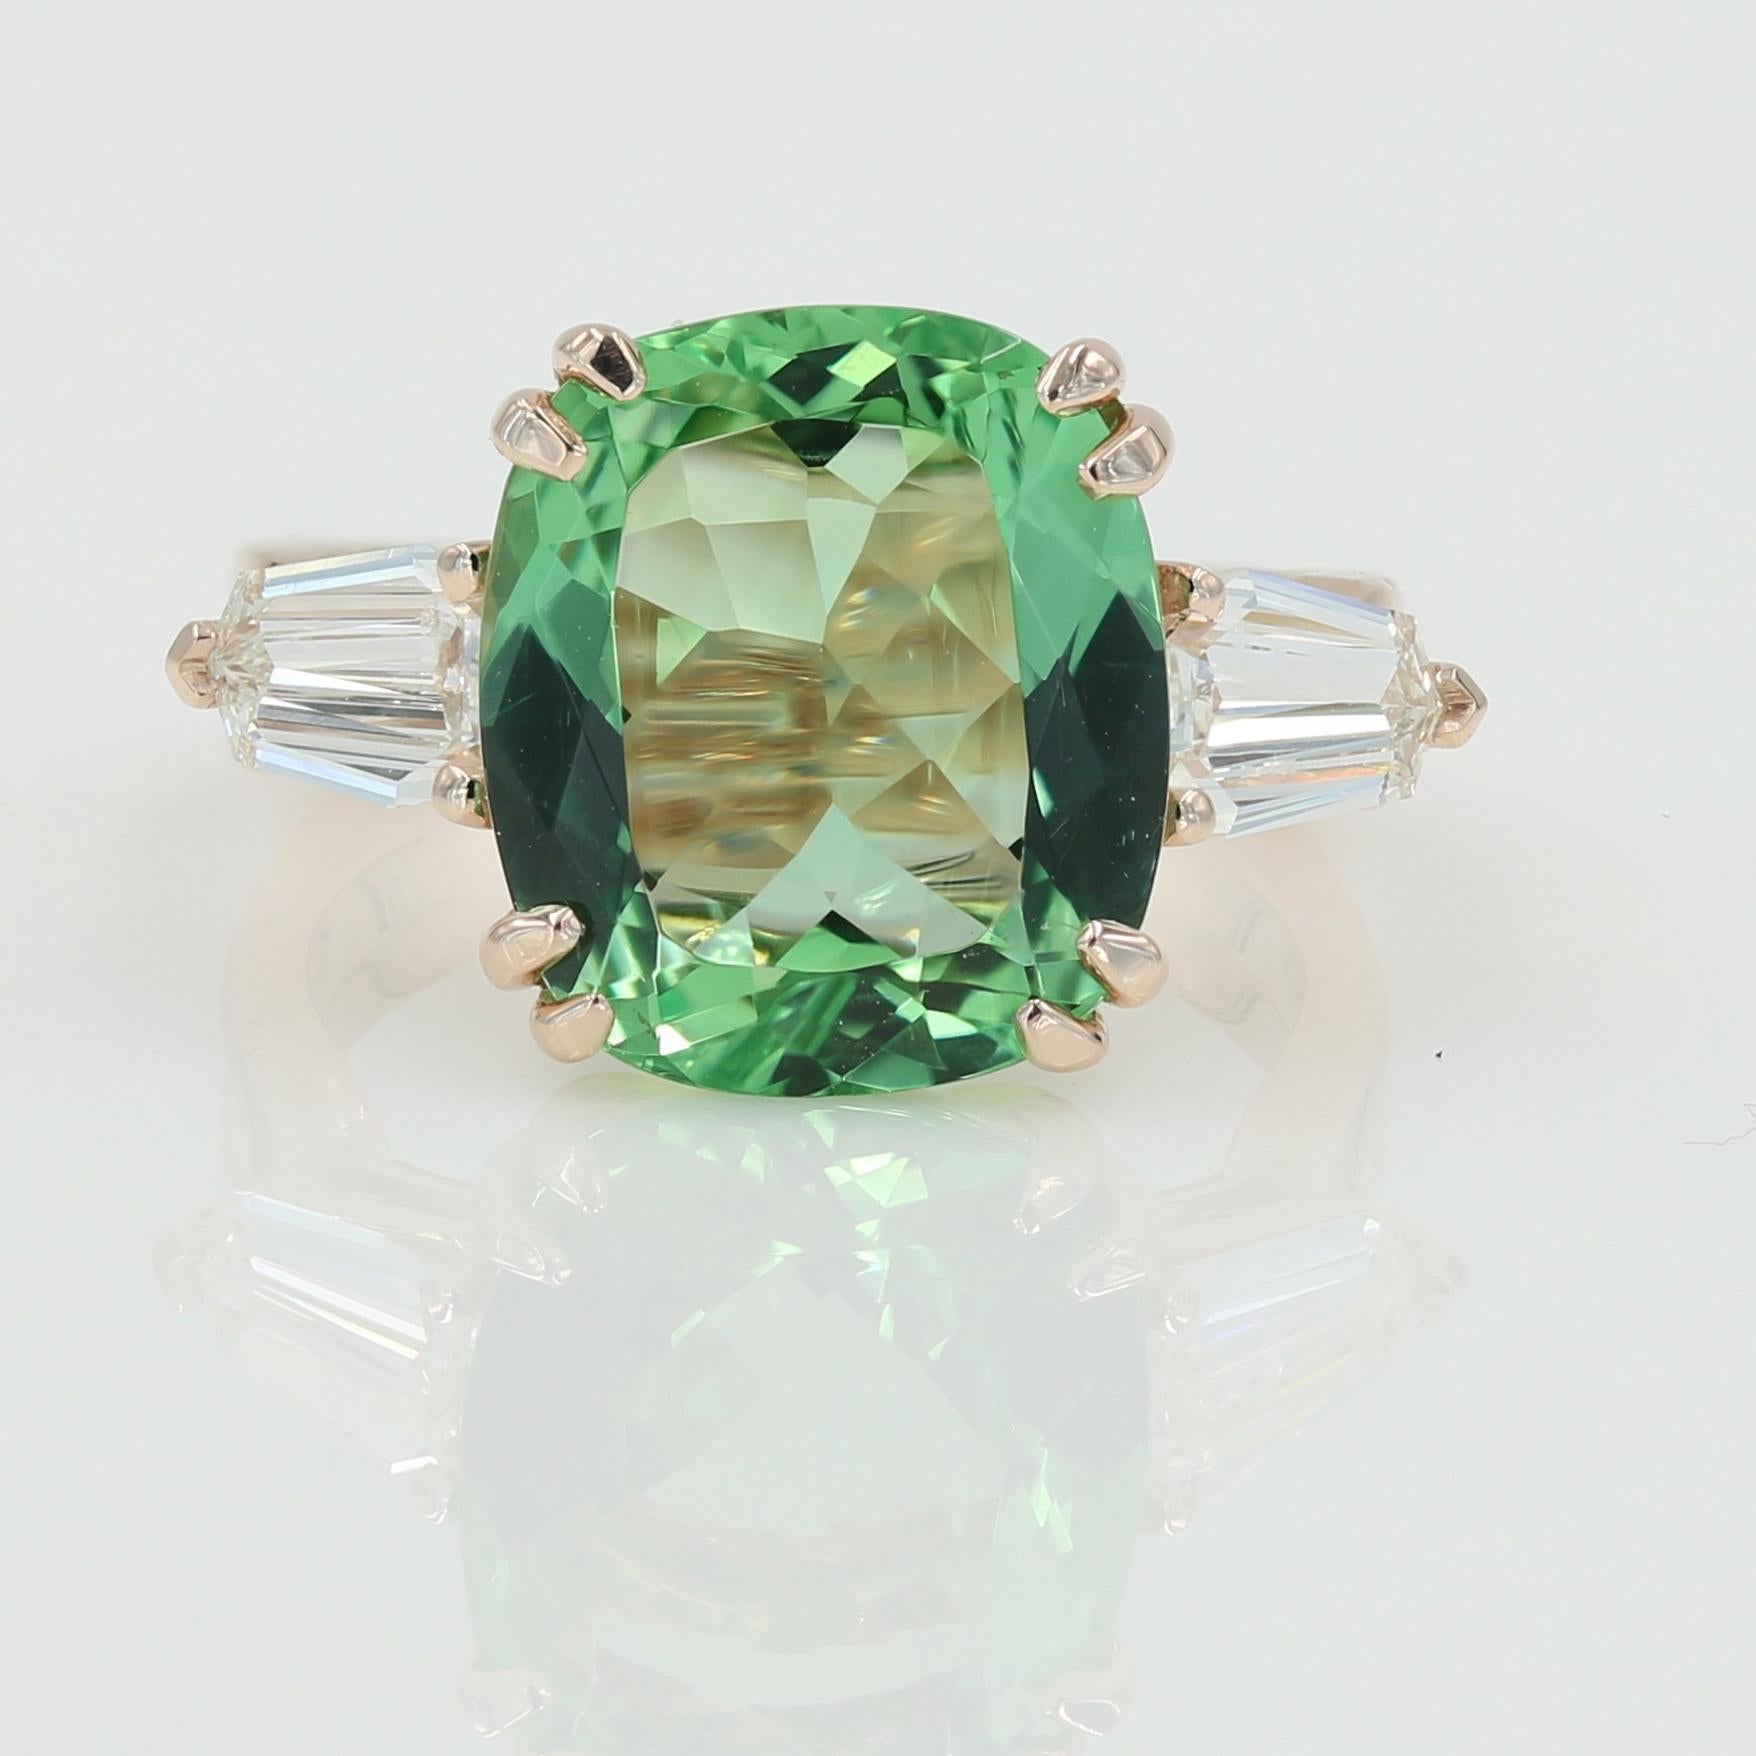 Natural cushion cut Green Beryl weighing 5.22cts set in a Lester Lampert original 14kt Rose Gold mounting with 2 shield cut diamonds weighing 0.84ctw. (F-G VS) 